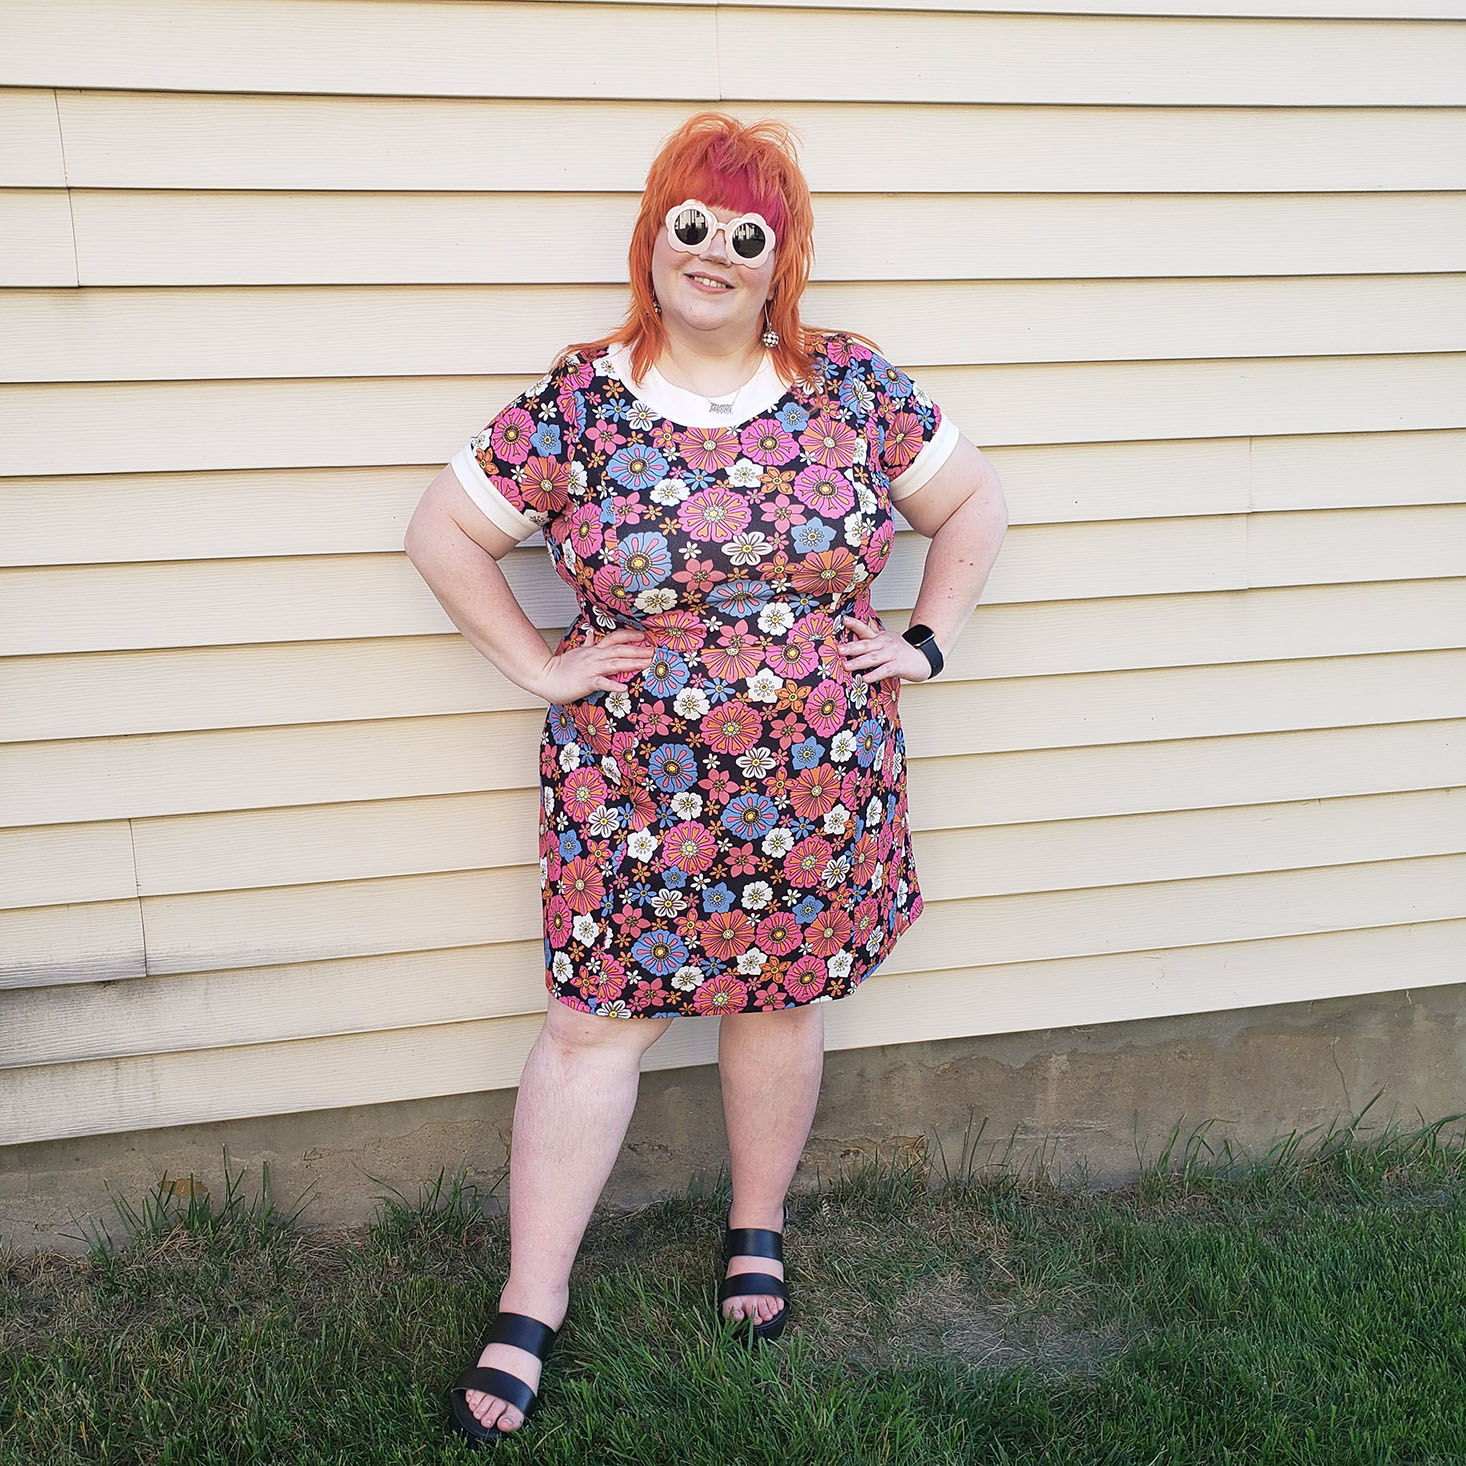 Style in the Mail: A Look at Gwynnie Bee